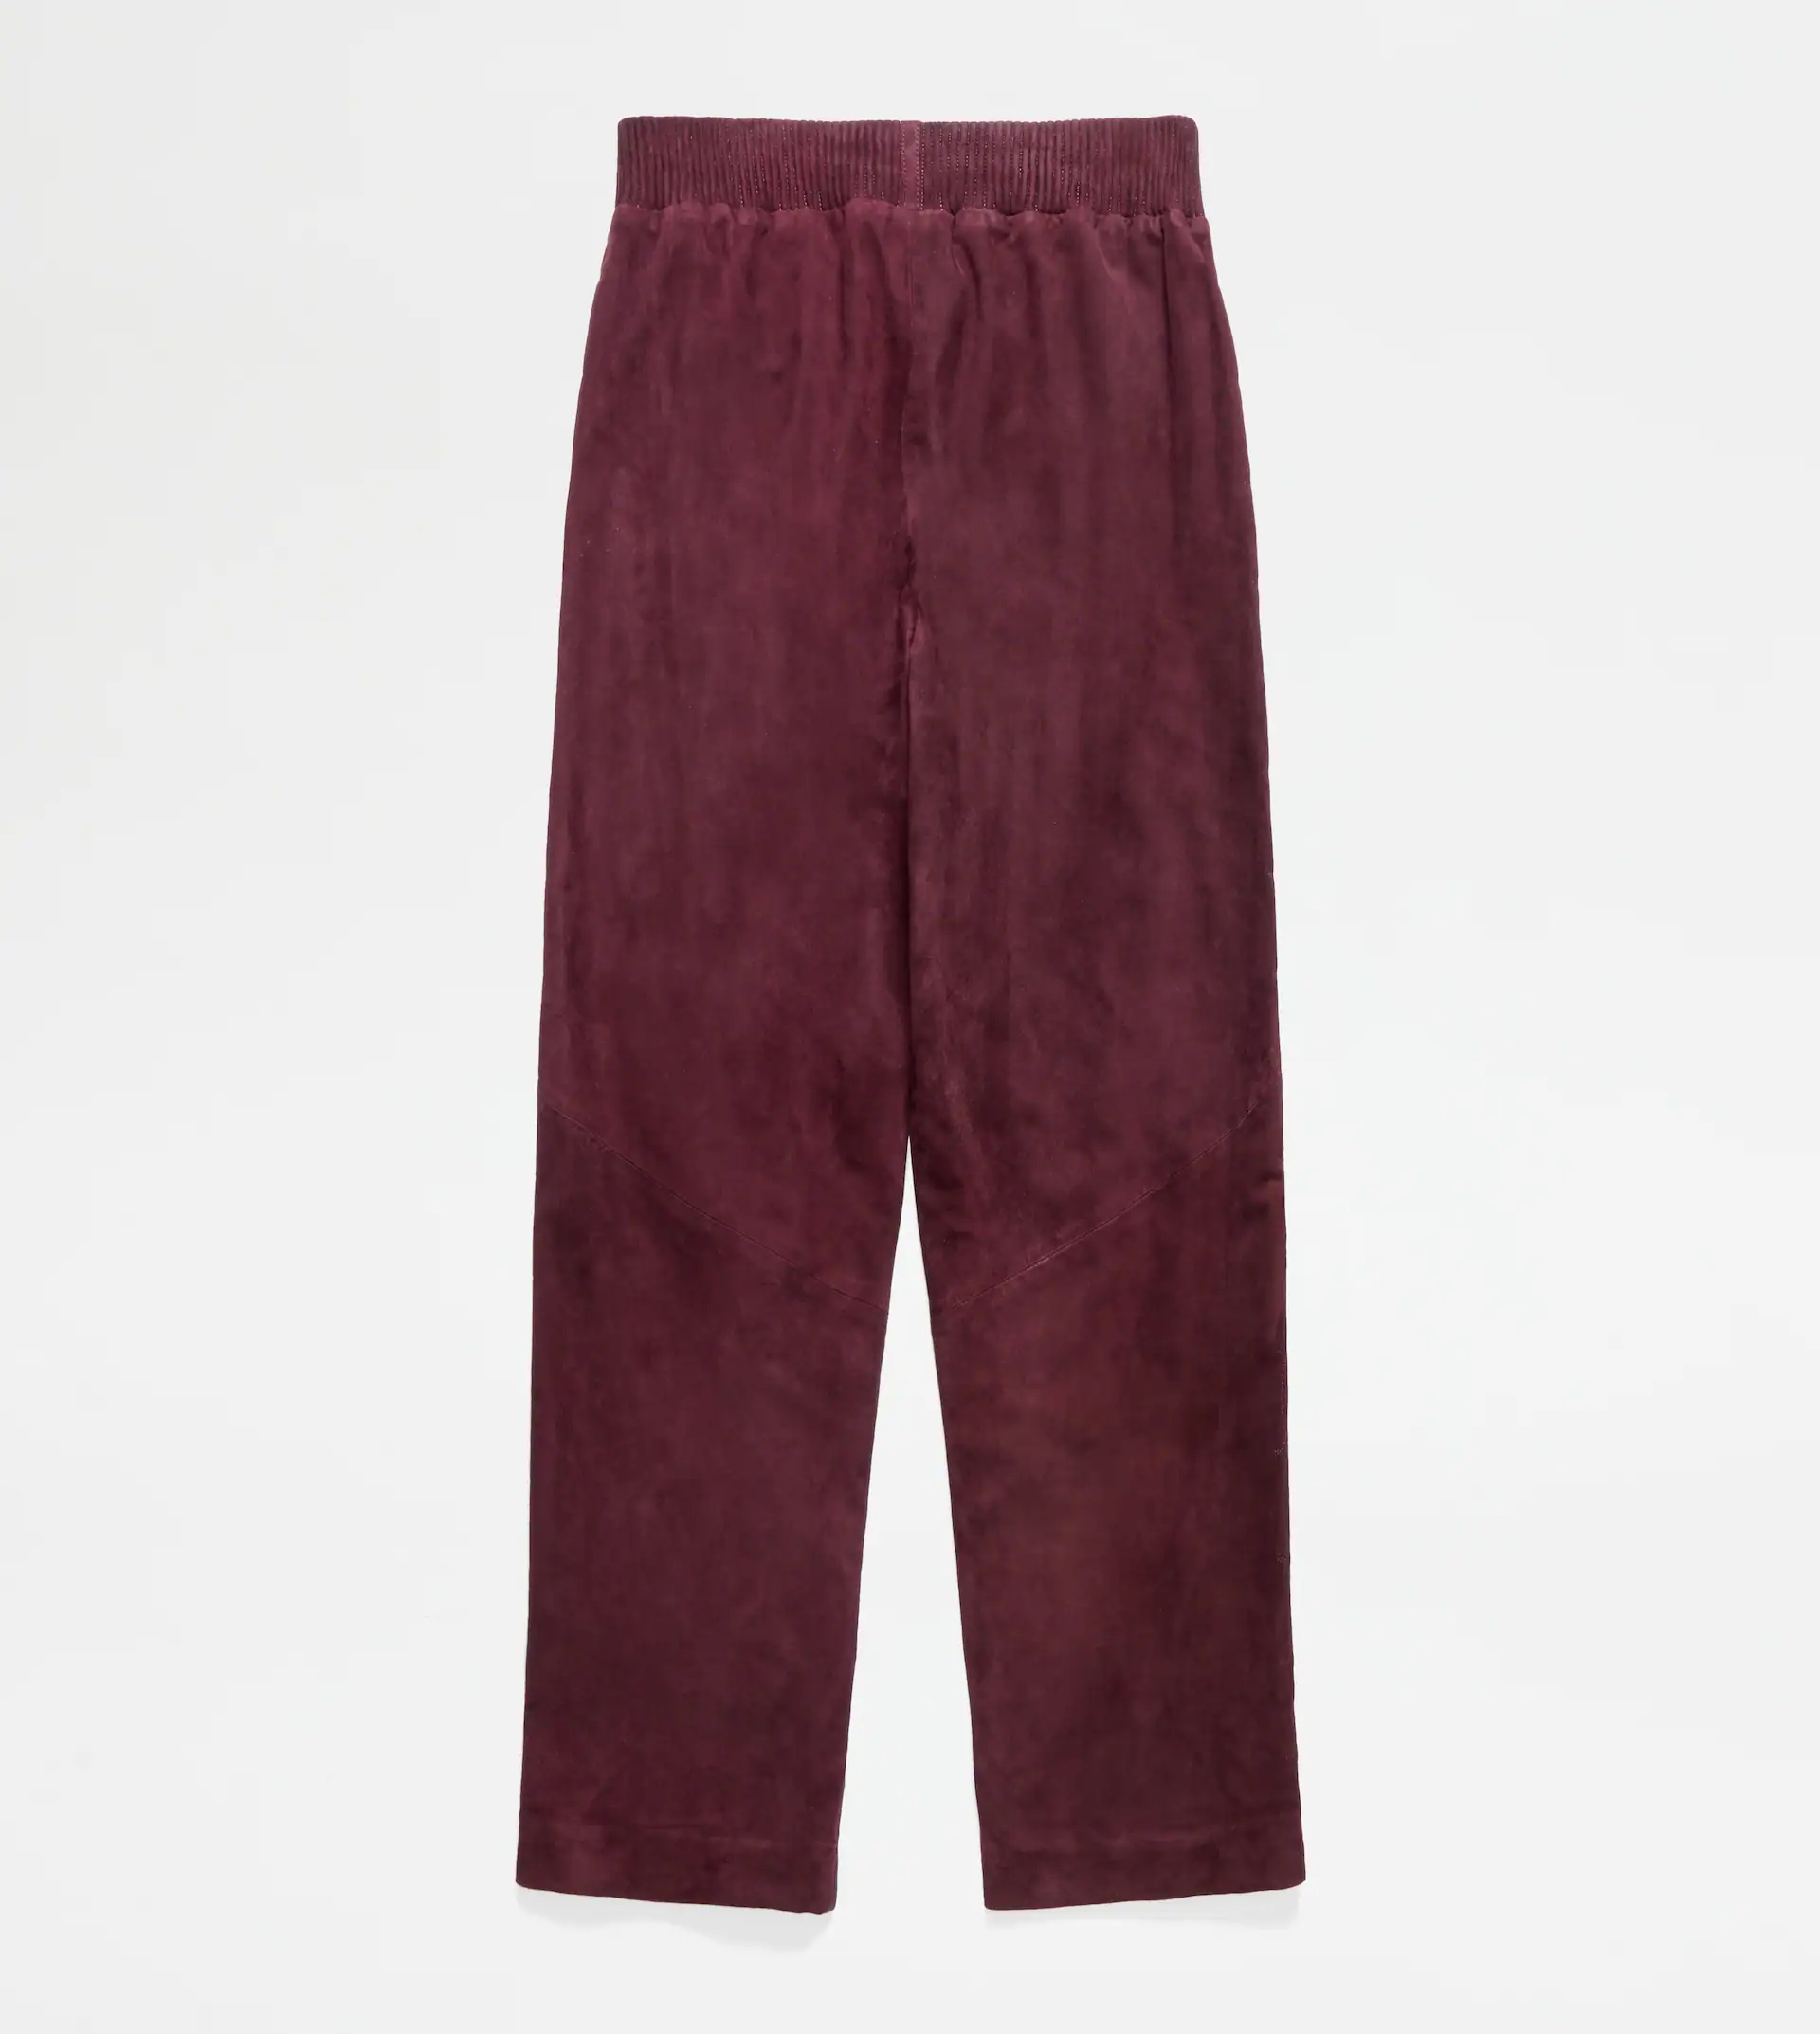 TRACKSUIT TROUSERS IN SUEDE - BURGUNDY - 4